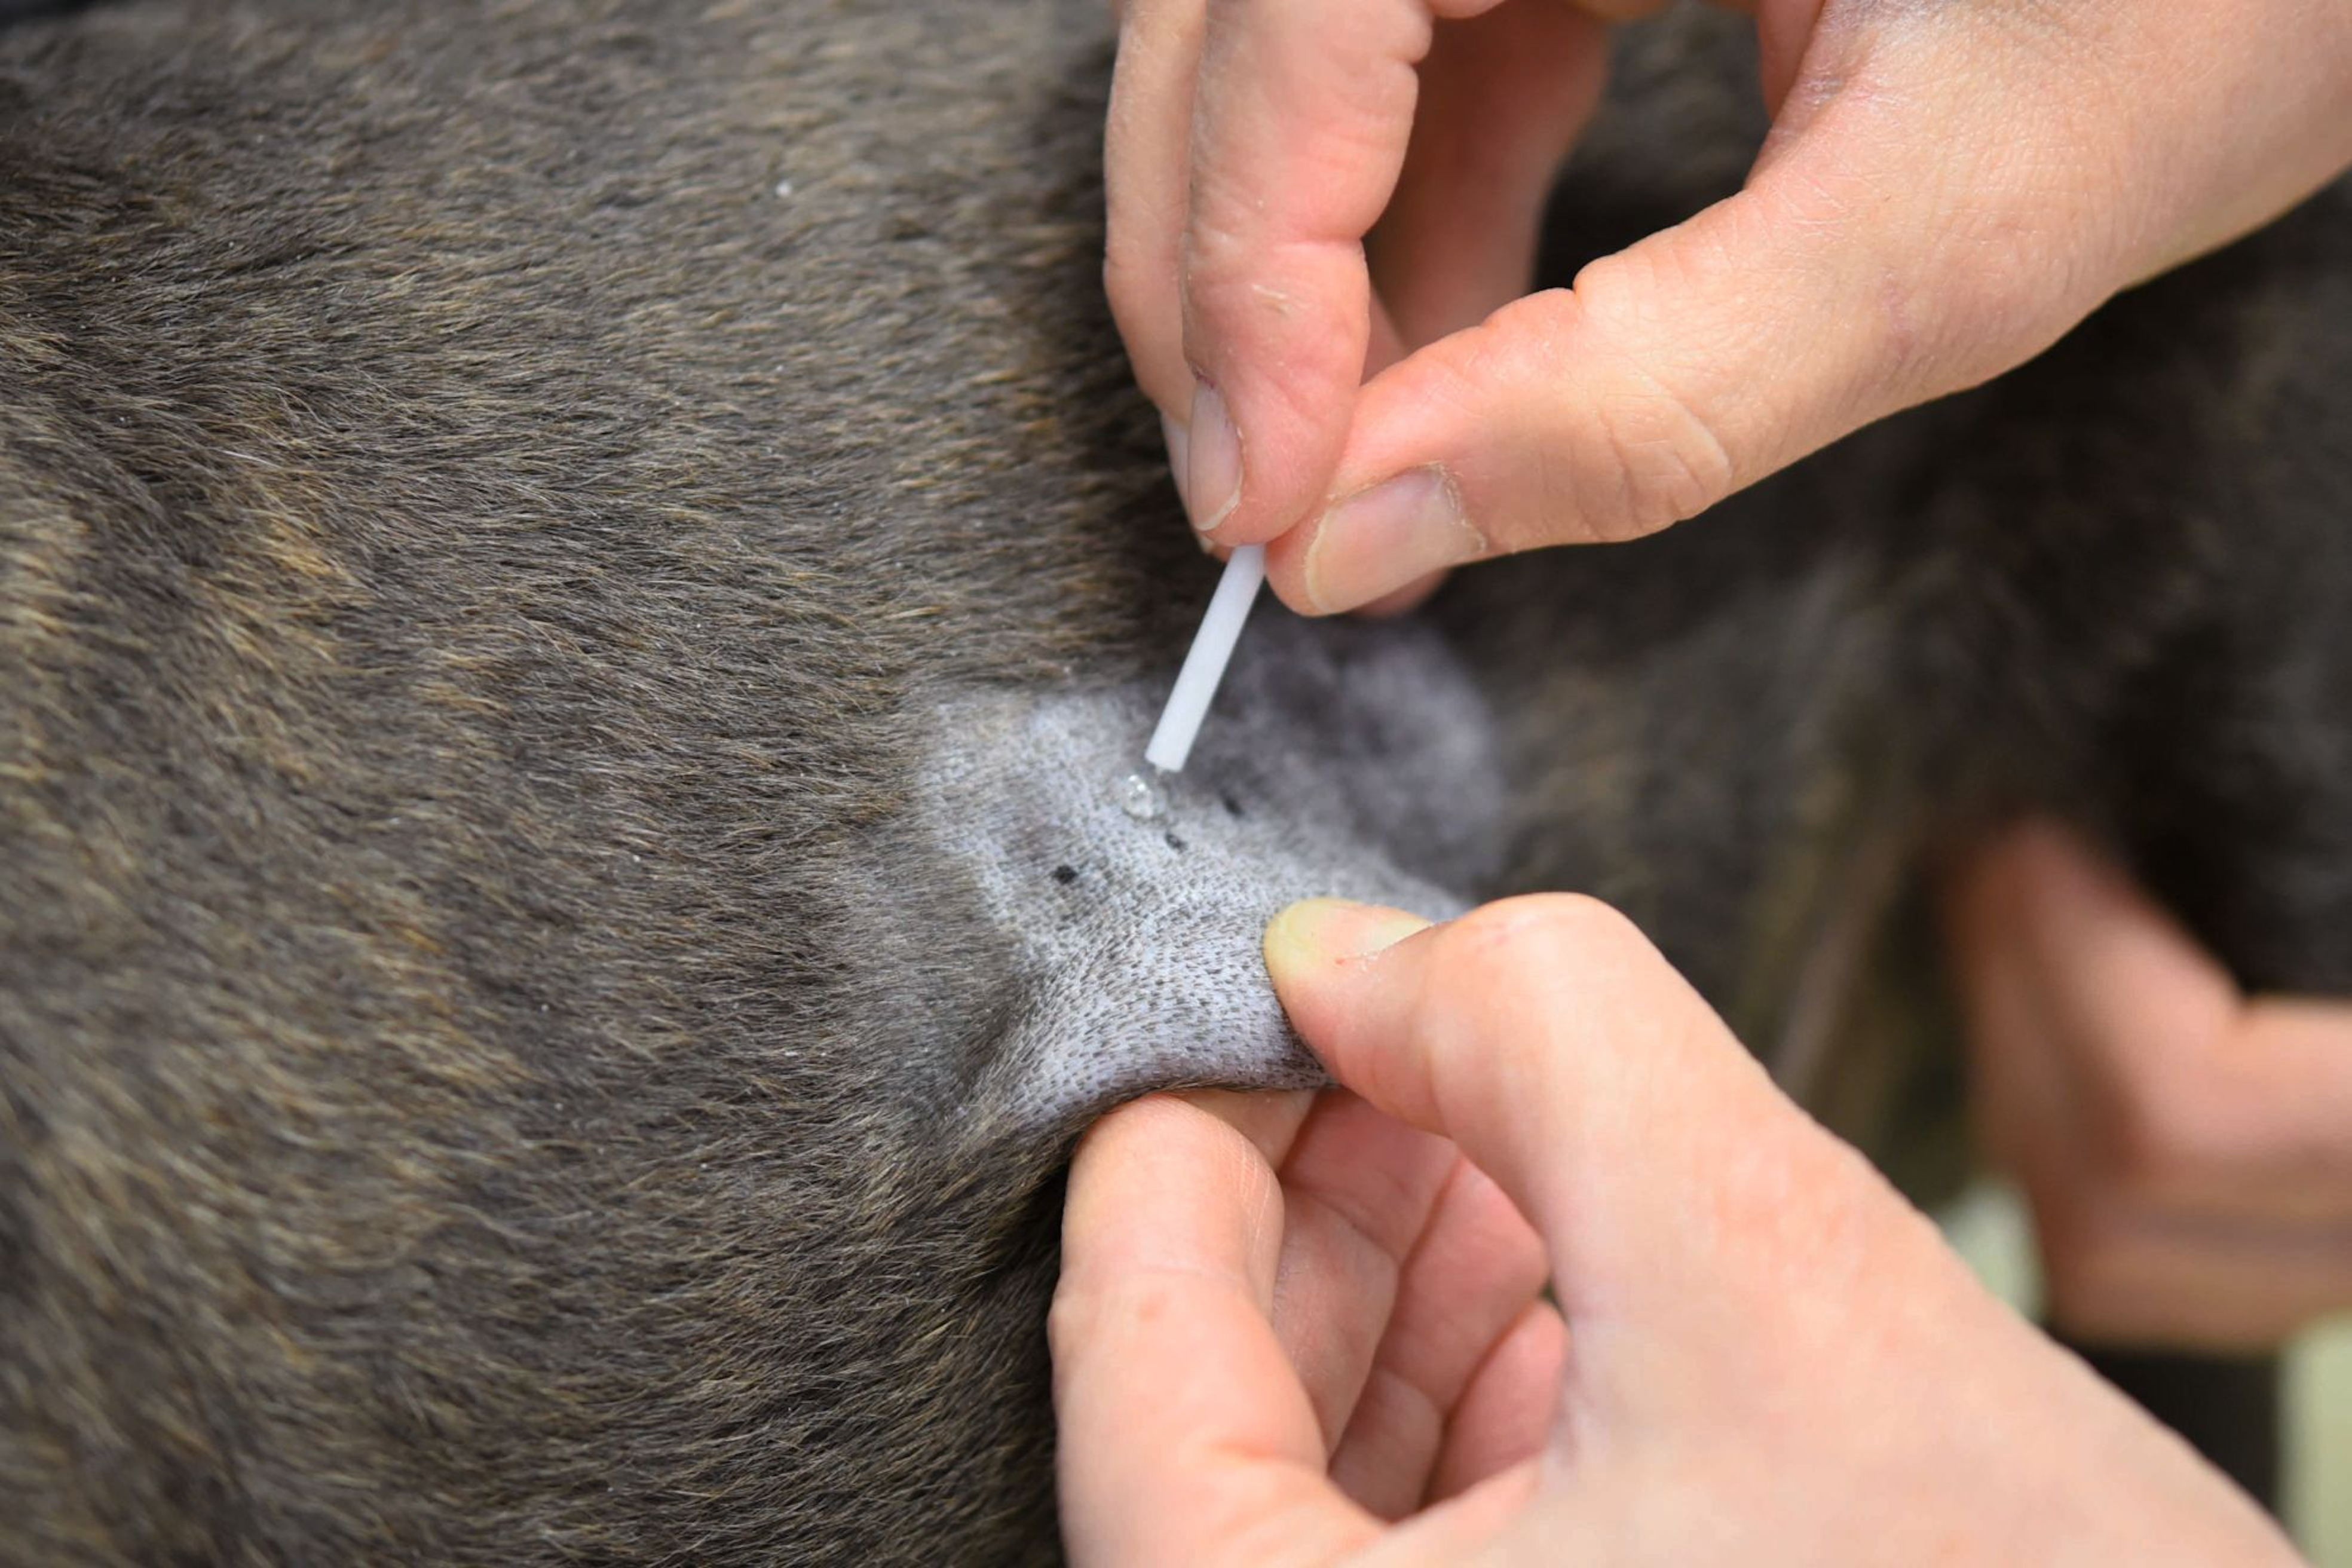 Performing a skin prick test in an atopic dog for the house dust mite allergen Dermatophagoides farina. This can be done without sedation, with the dog in a standing position and the flank shaved as for an IDT. (b) The skin is immediately pricked using a commercial device held at 45 degrees to the skin.